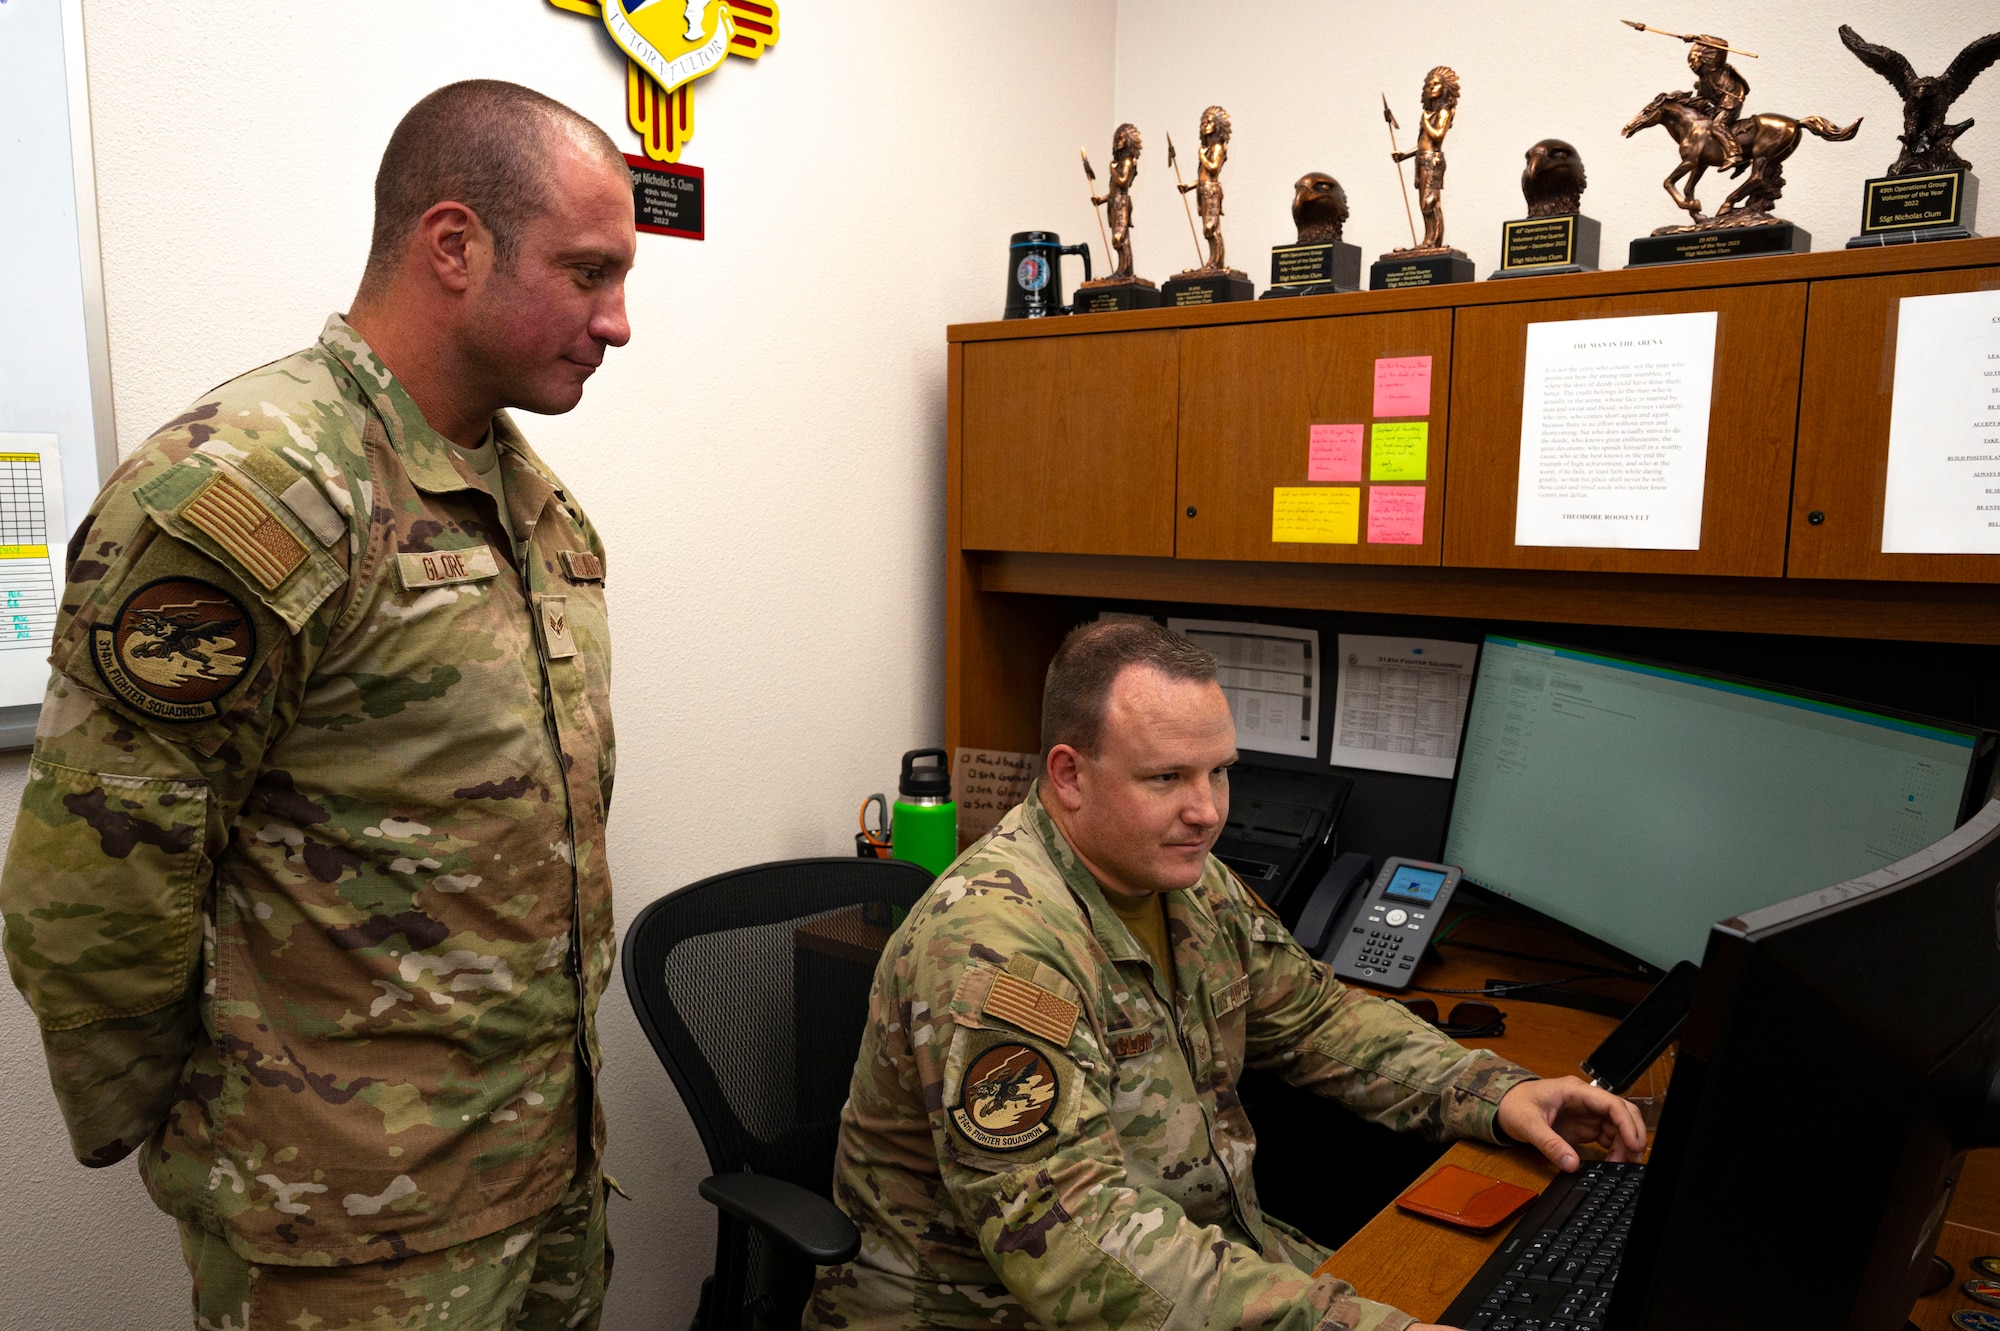 U.S. Air Force Staff. Sgt. Nicholas Clum, 314th Fighter Squadron aviation resource management noncommissioned officer in charge, and Senior Airman Garret Galore, 314th FS aviation resource management journeyman, monitor the daily flight mission data together at Holloman Air Force Base, New Mexico, Aug. 29, 2023. SARMs create each flight plan, ensuring that every flight mission at Holloman is scheduled, equipped, and executed safely. (U.S. Air Force photo by Airman 1st Class Isaiah Pedrazzini)